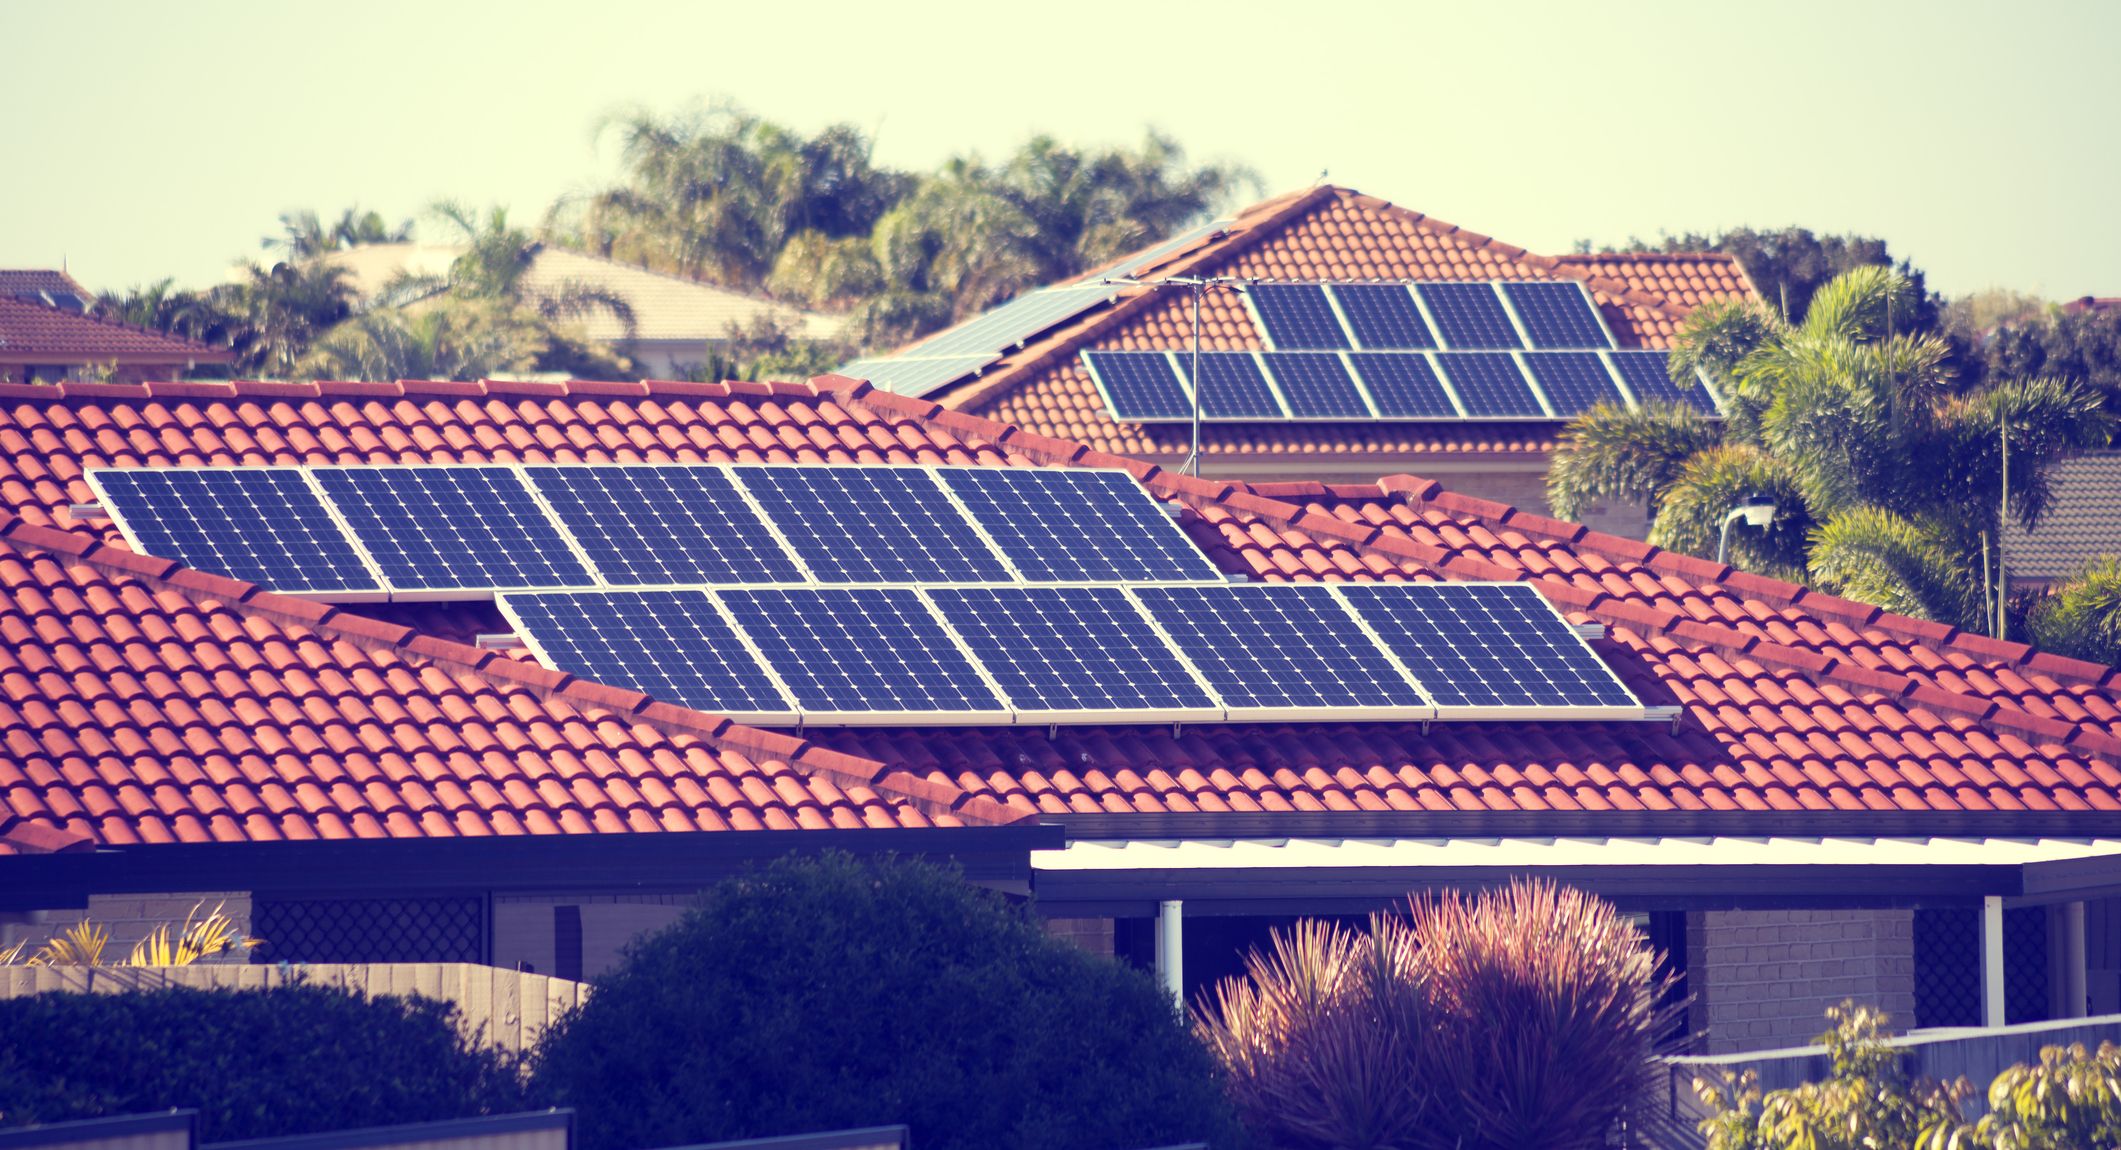 Could solar panels harm the environment?